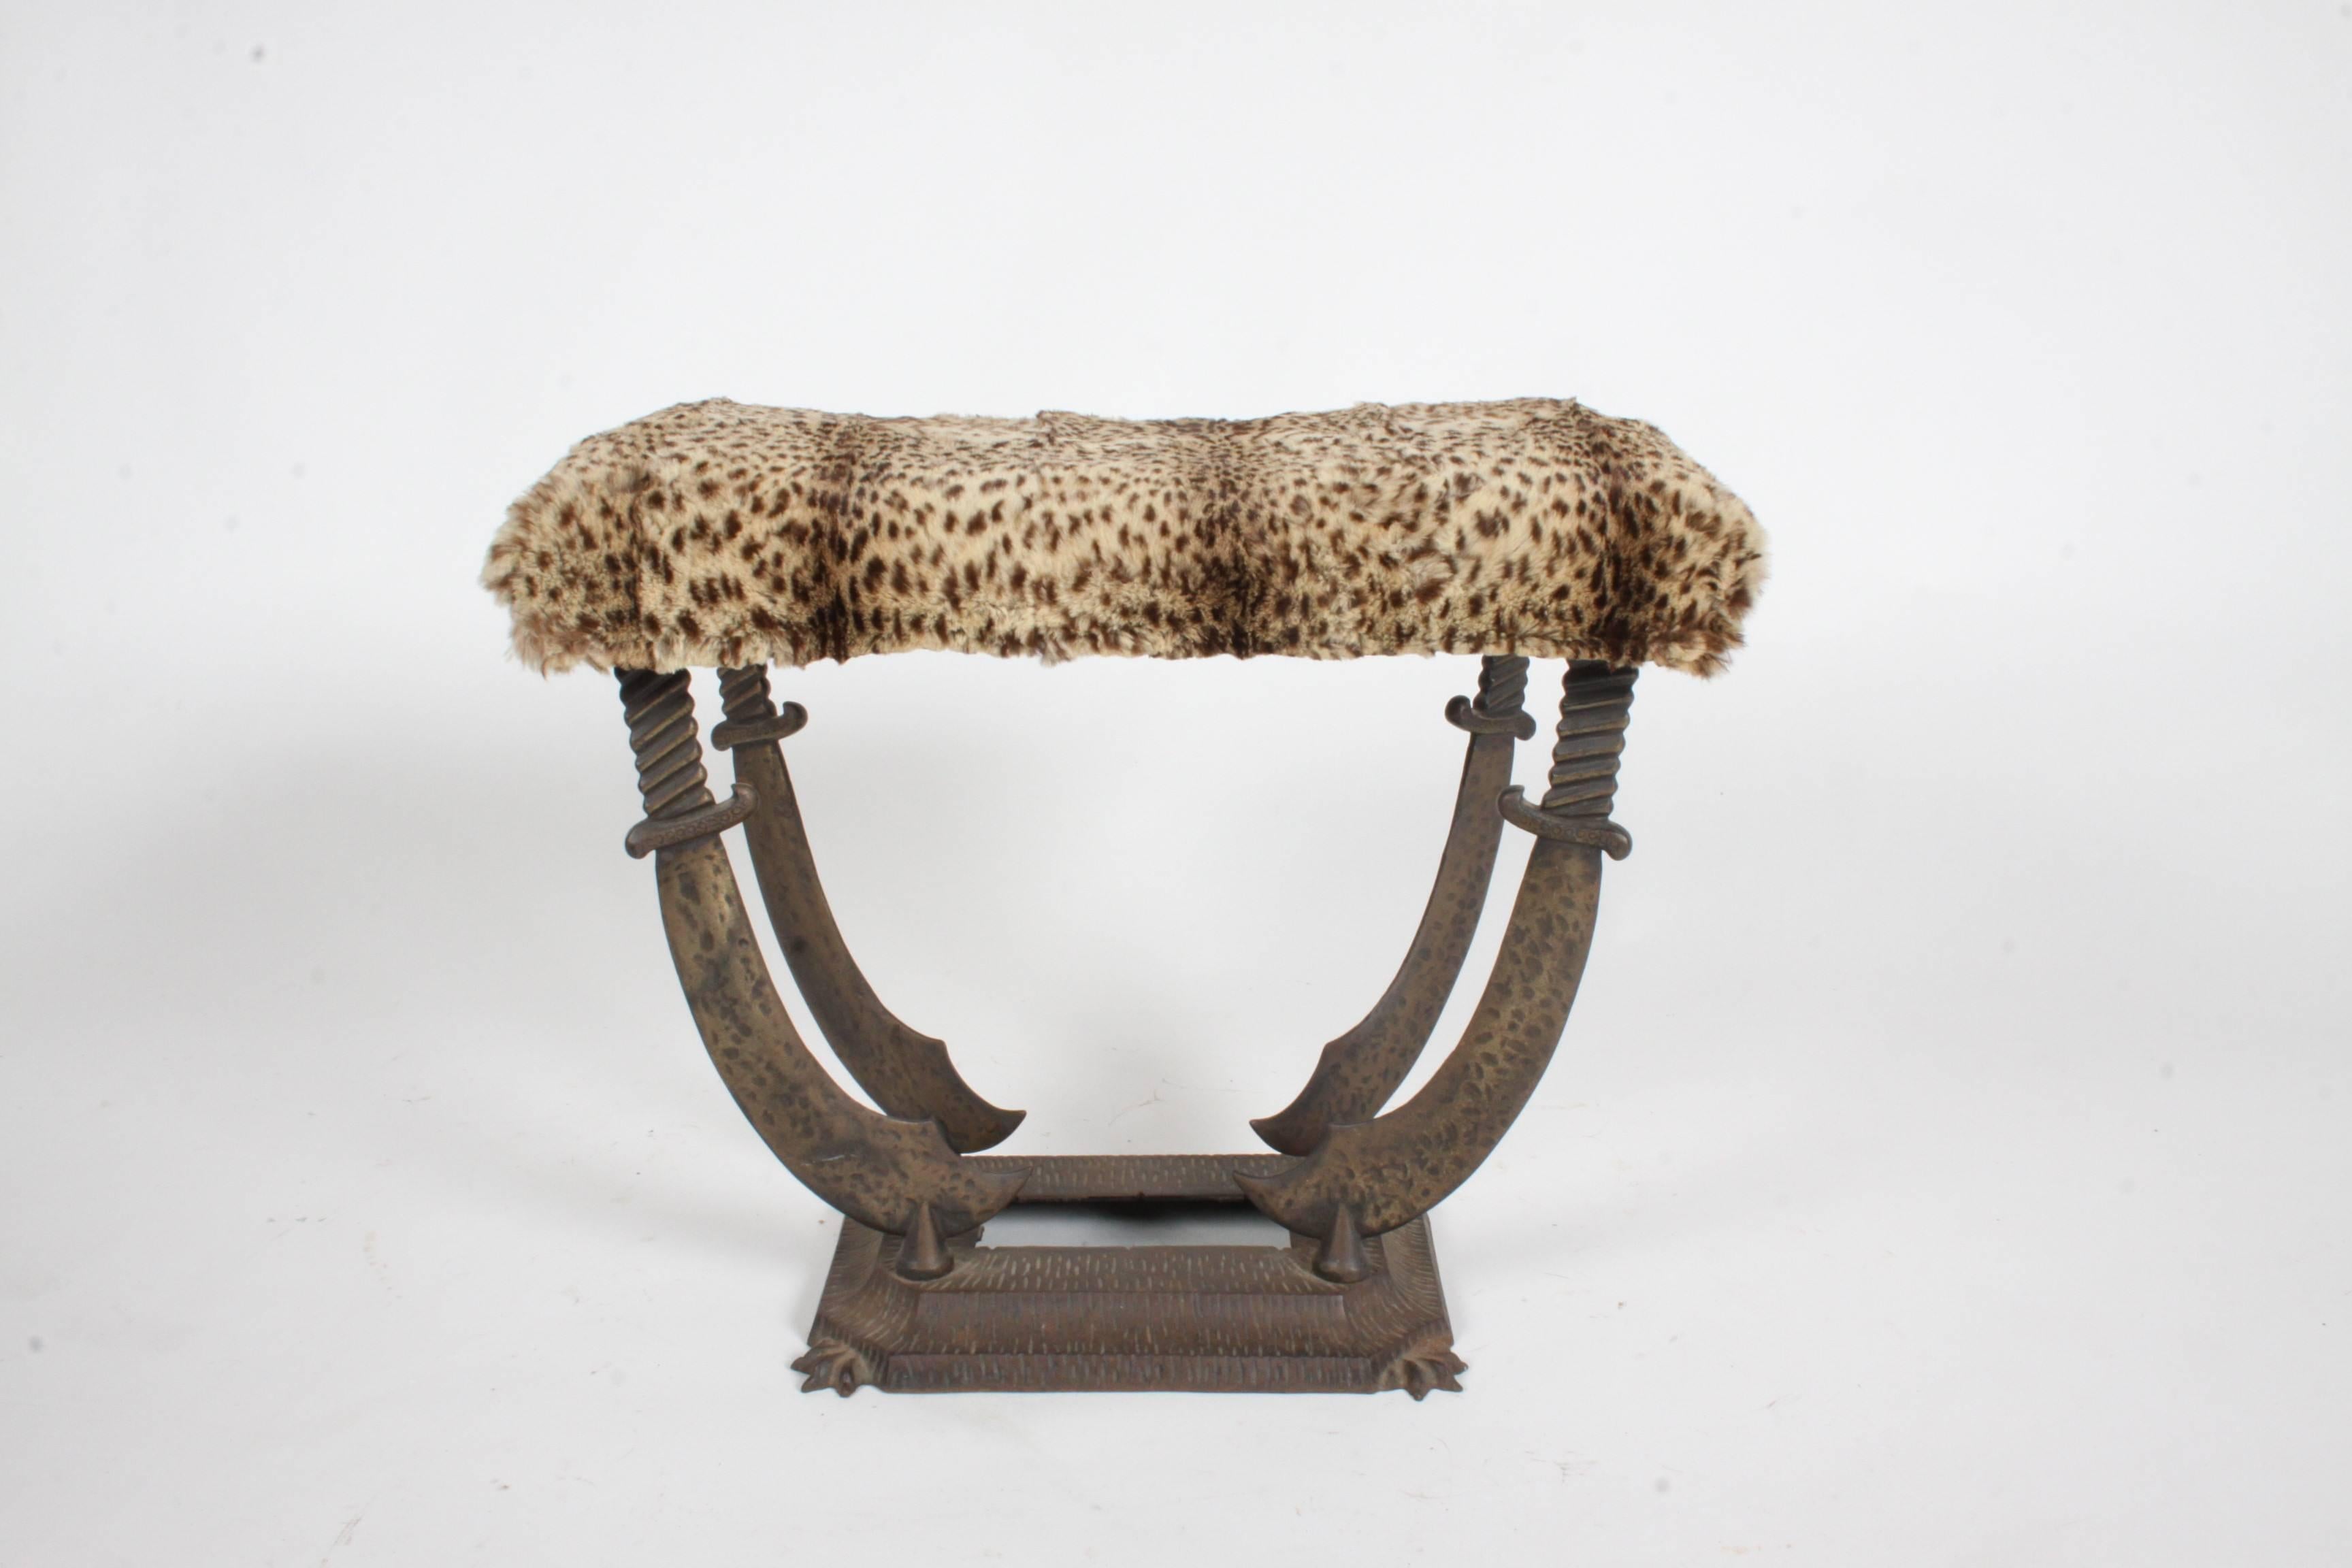 Art Deco sabre cast iron bench or stool with vintage leopard upholstery. Stamped Verona, with pat. number. In the style of Oscar Bach. Vintage leopard fur, bench purchased form long time Art Deco dealer and collector.